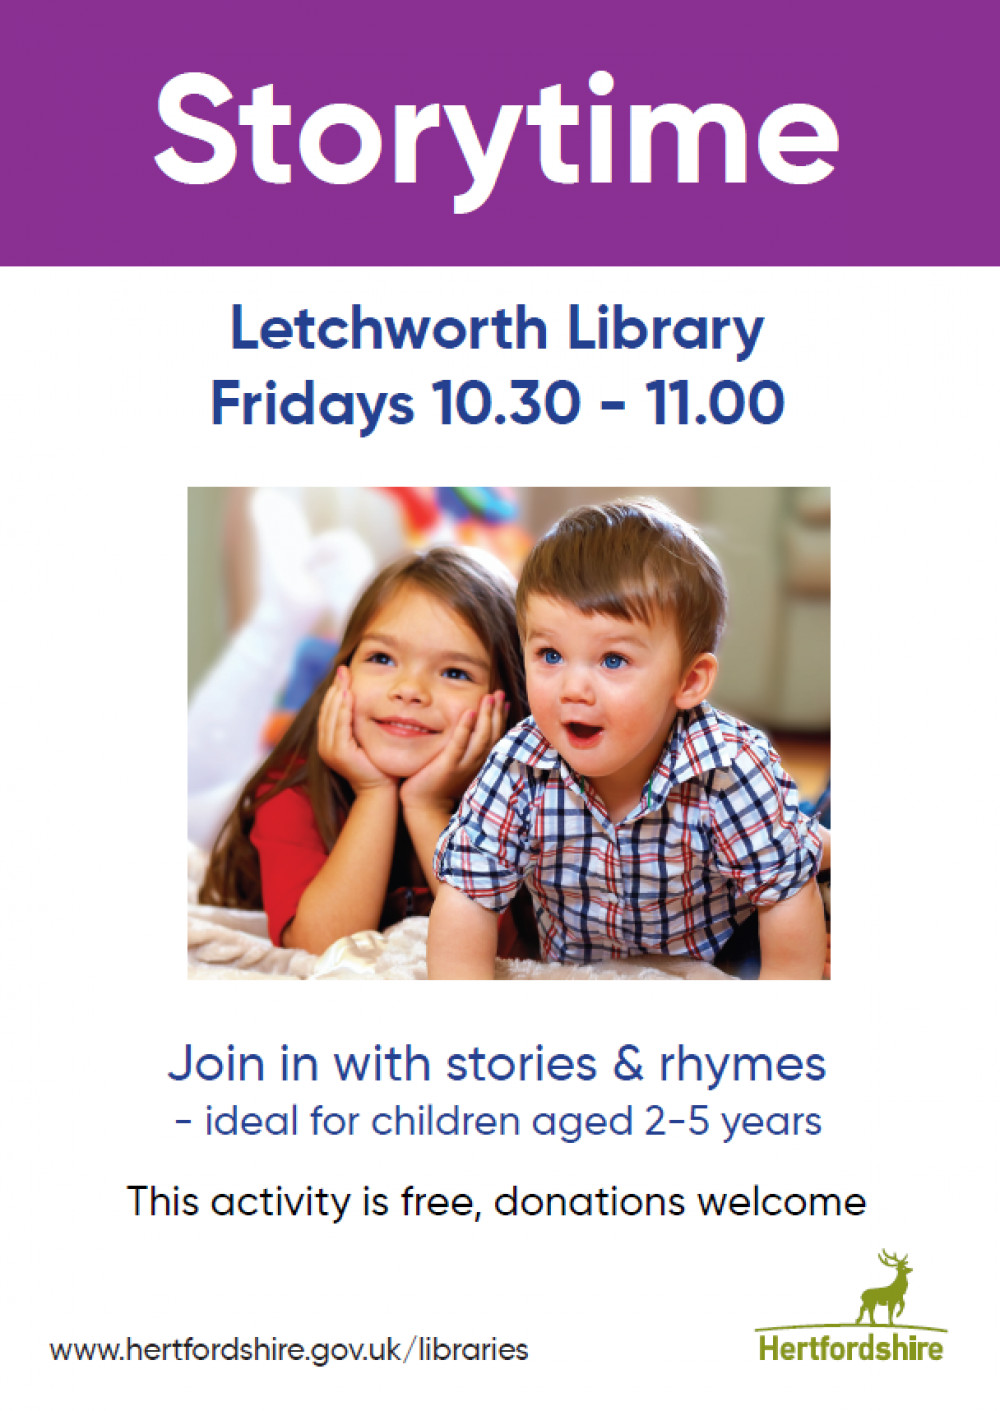 Children's Story time at Letchworth Library